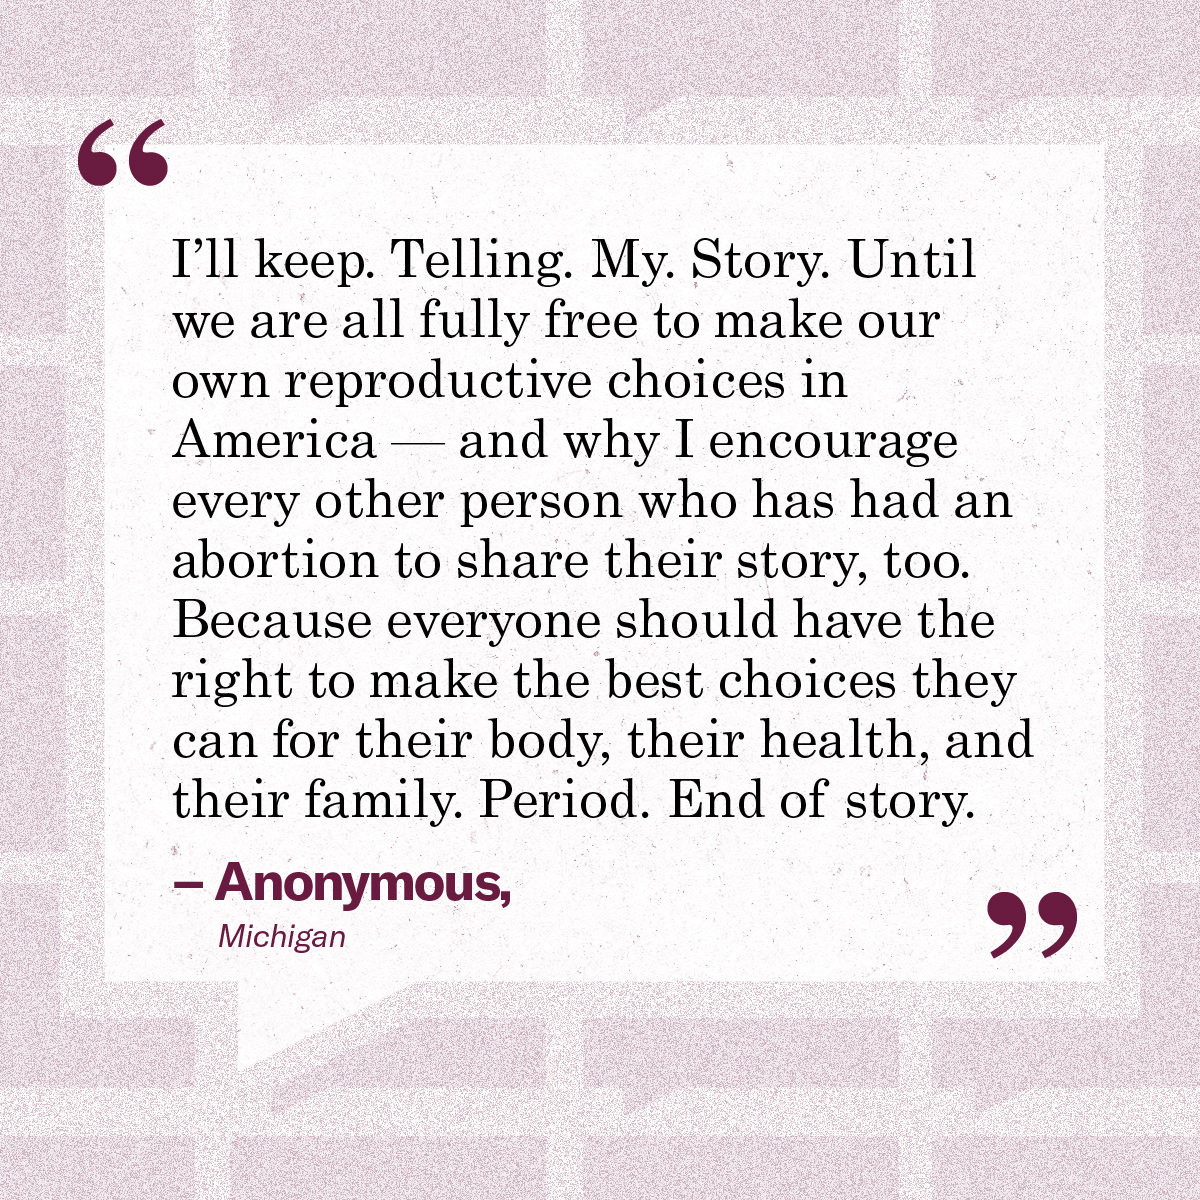 “I’ll keep. Telling. My. Story. Until we are all fully free to make our own reproductive choices in America — and why I encourage every other person who has had an abortion to share their story, too. Because everyone should have the right to make the best choices they can for their body, their health, and their family. Period. End of story.” – Anonymous, Michigan